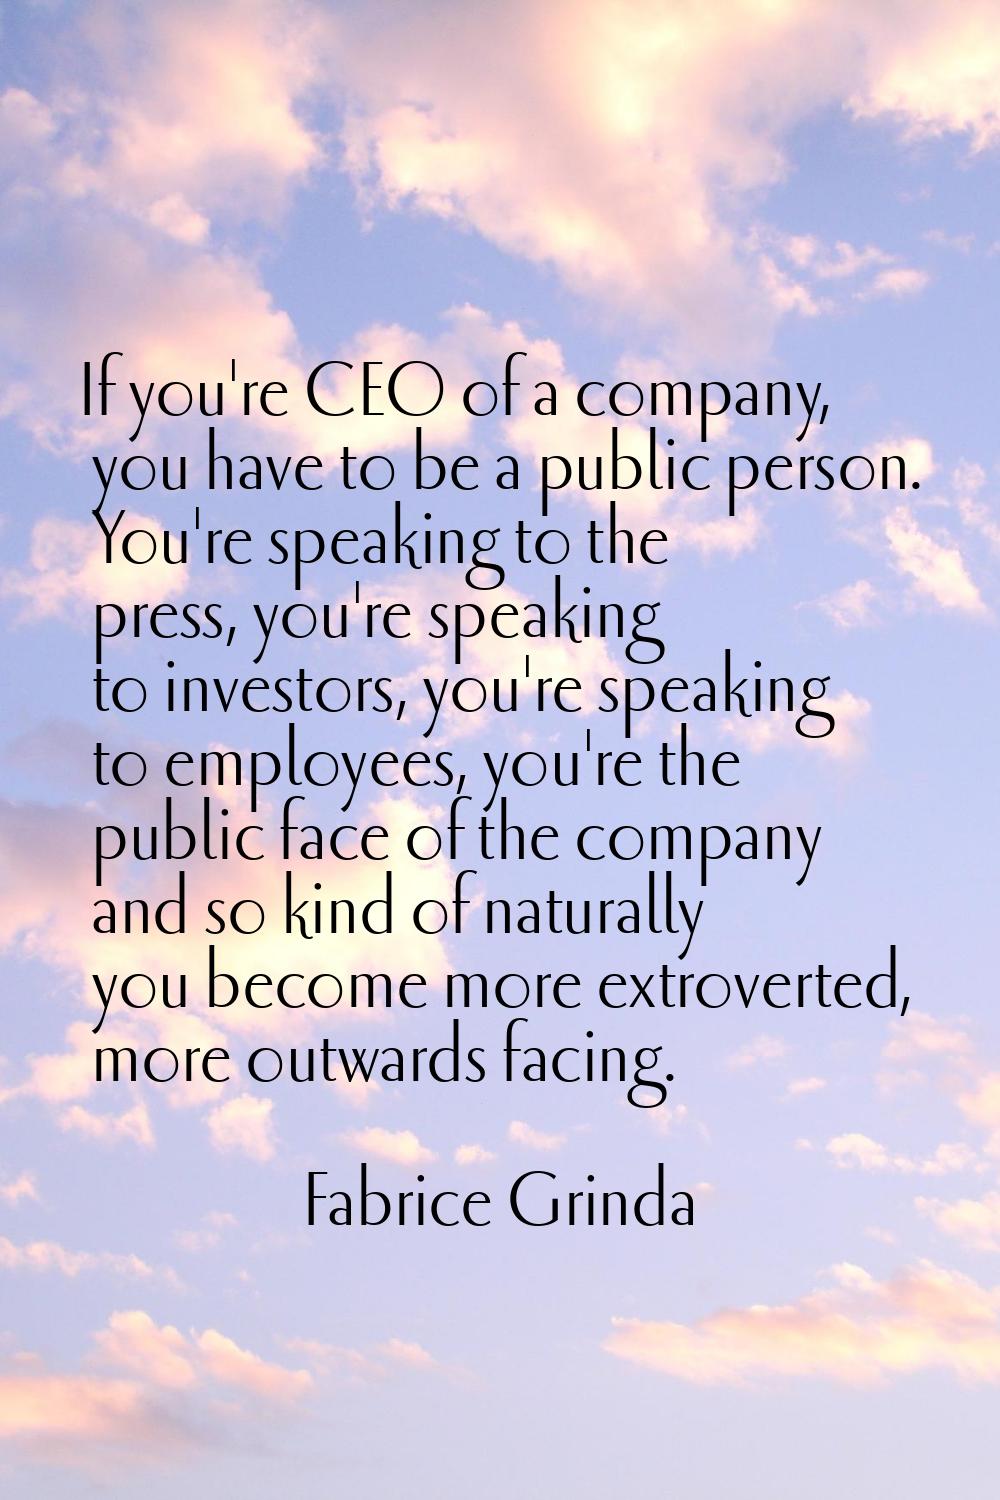 If you're CEO of a company, you have to be a public person. You're speaking to the press, you're sp